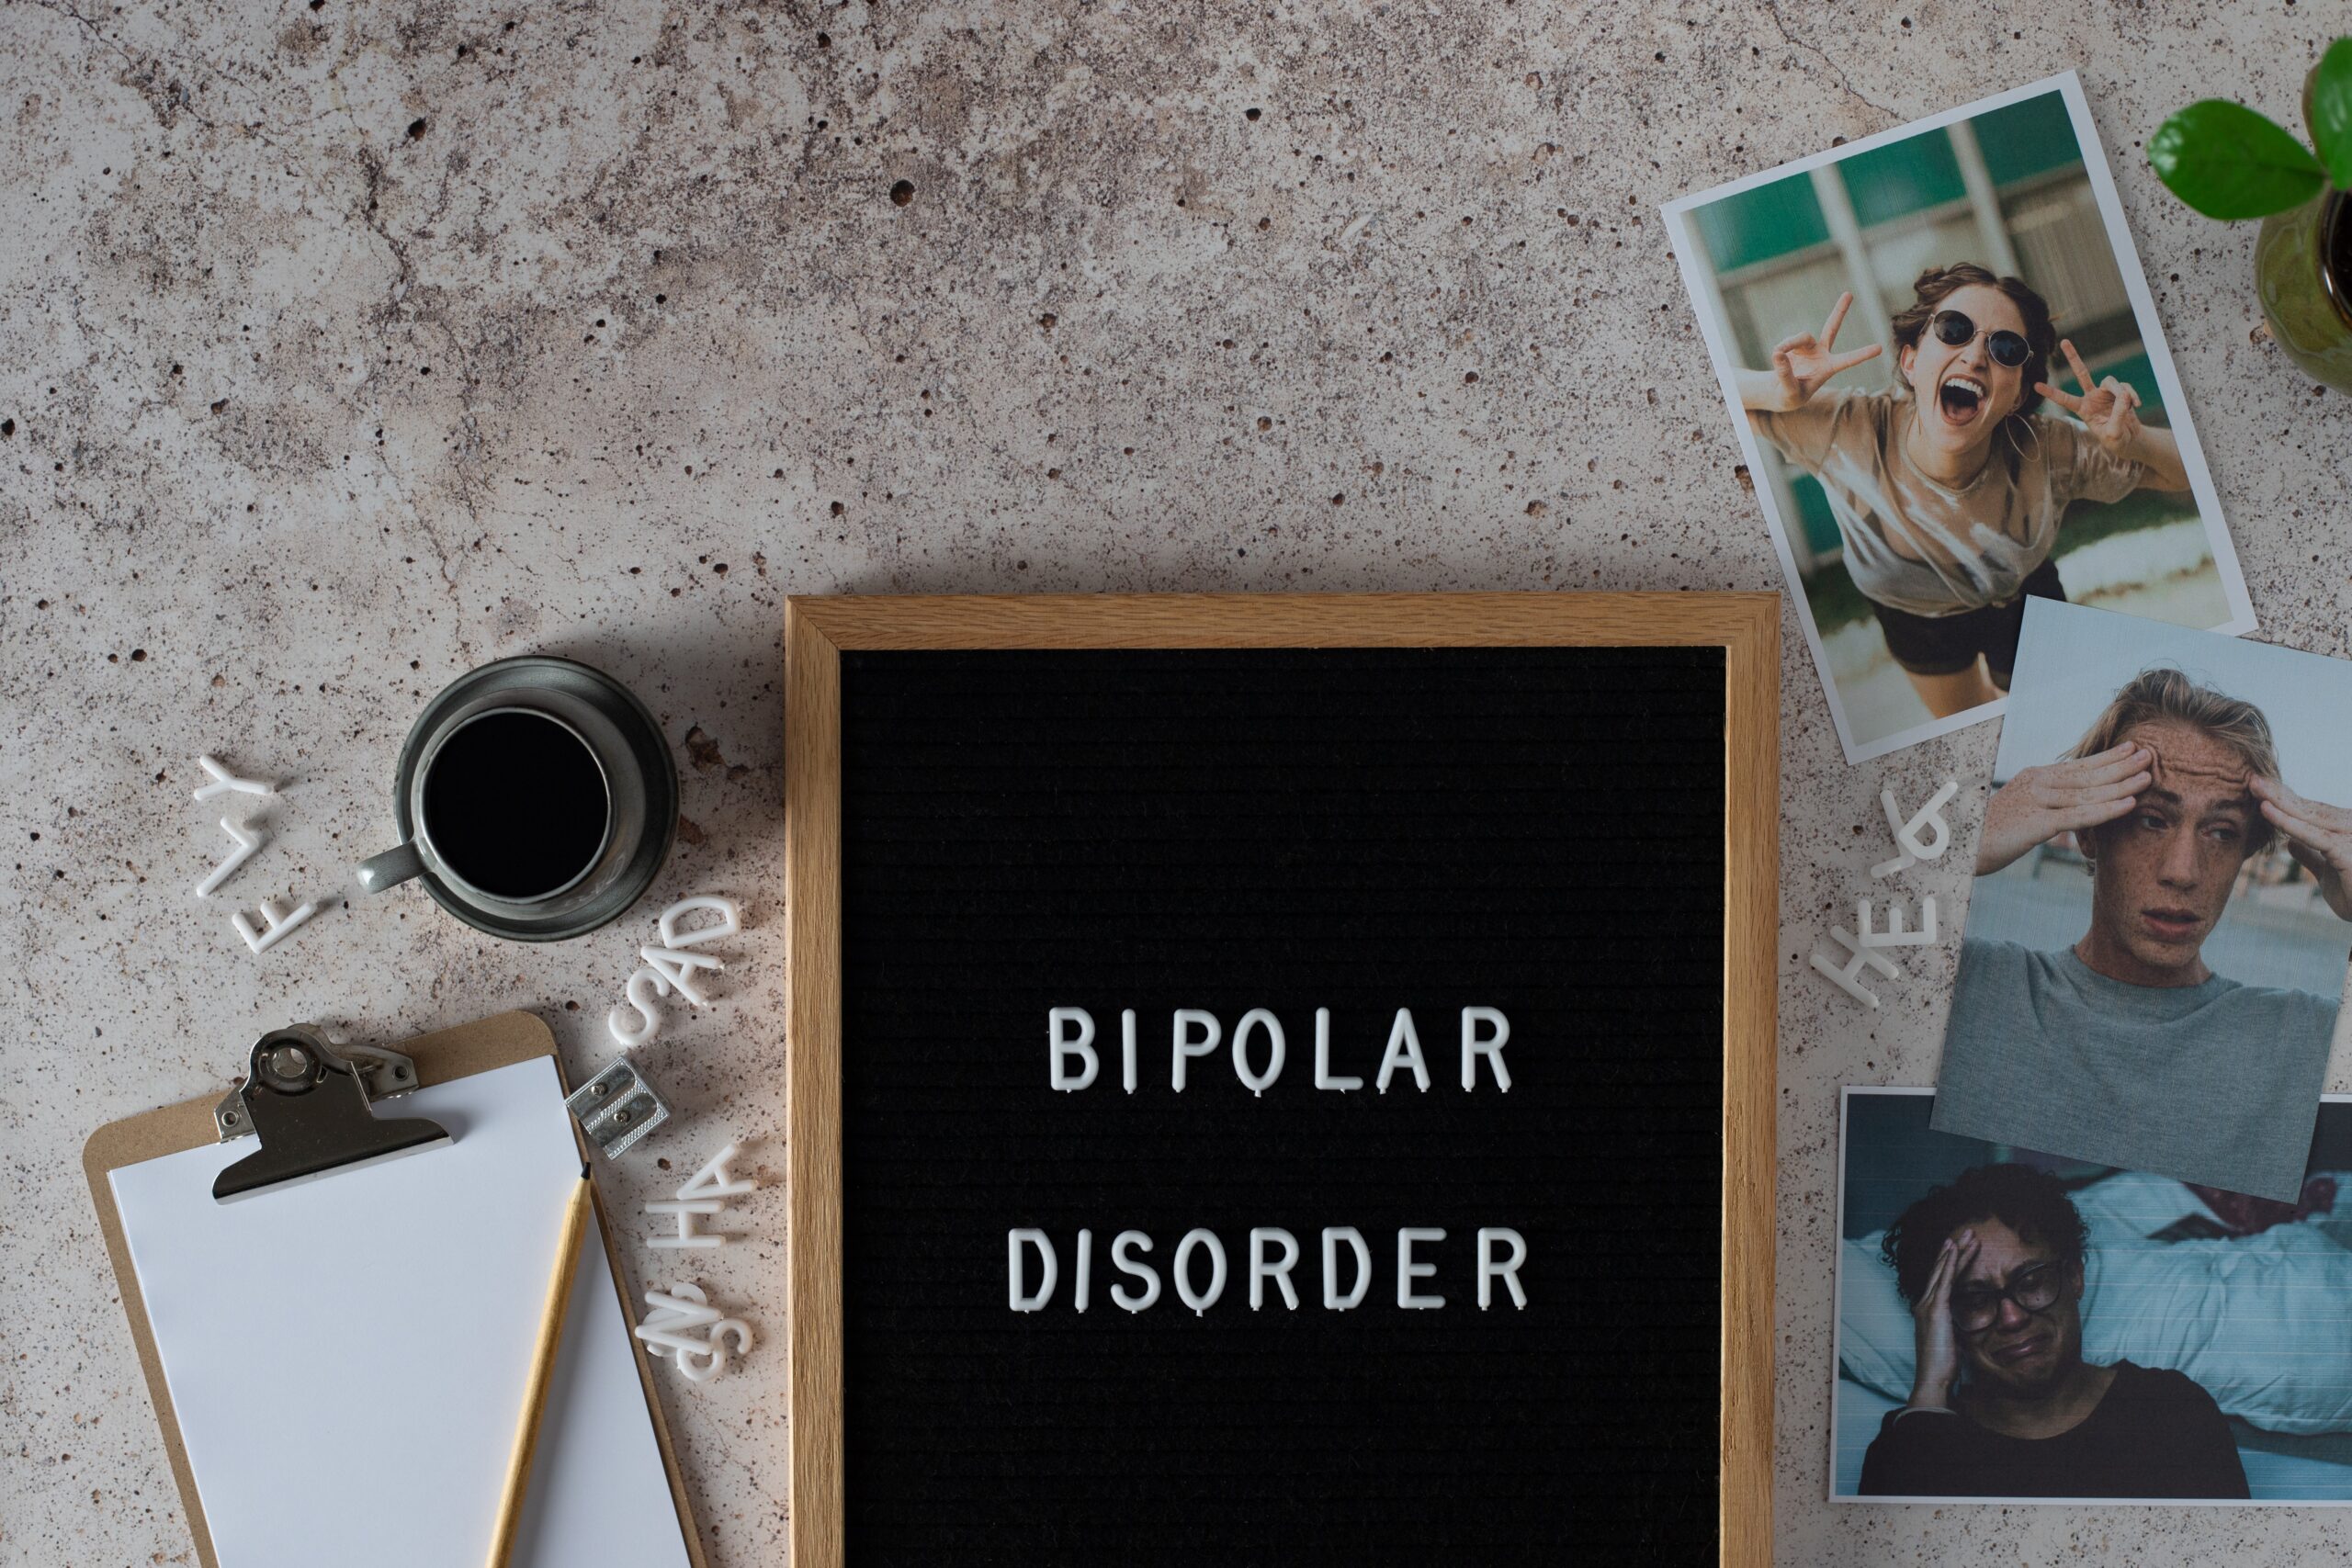 #JamesDonaldson On #MentalHealth – Do People With #BipolarDisorder Think More Often About #Suicide?